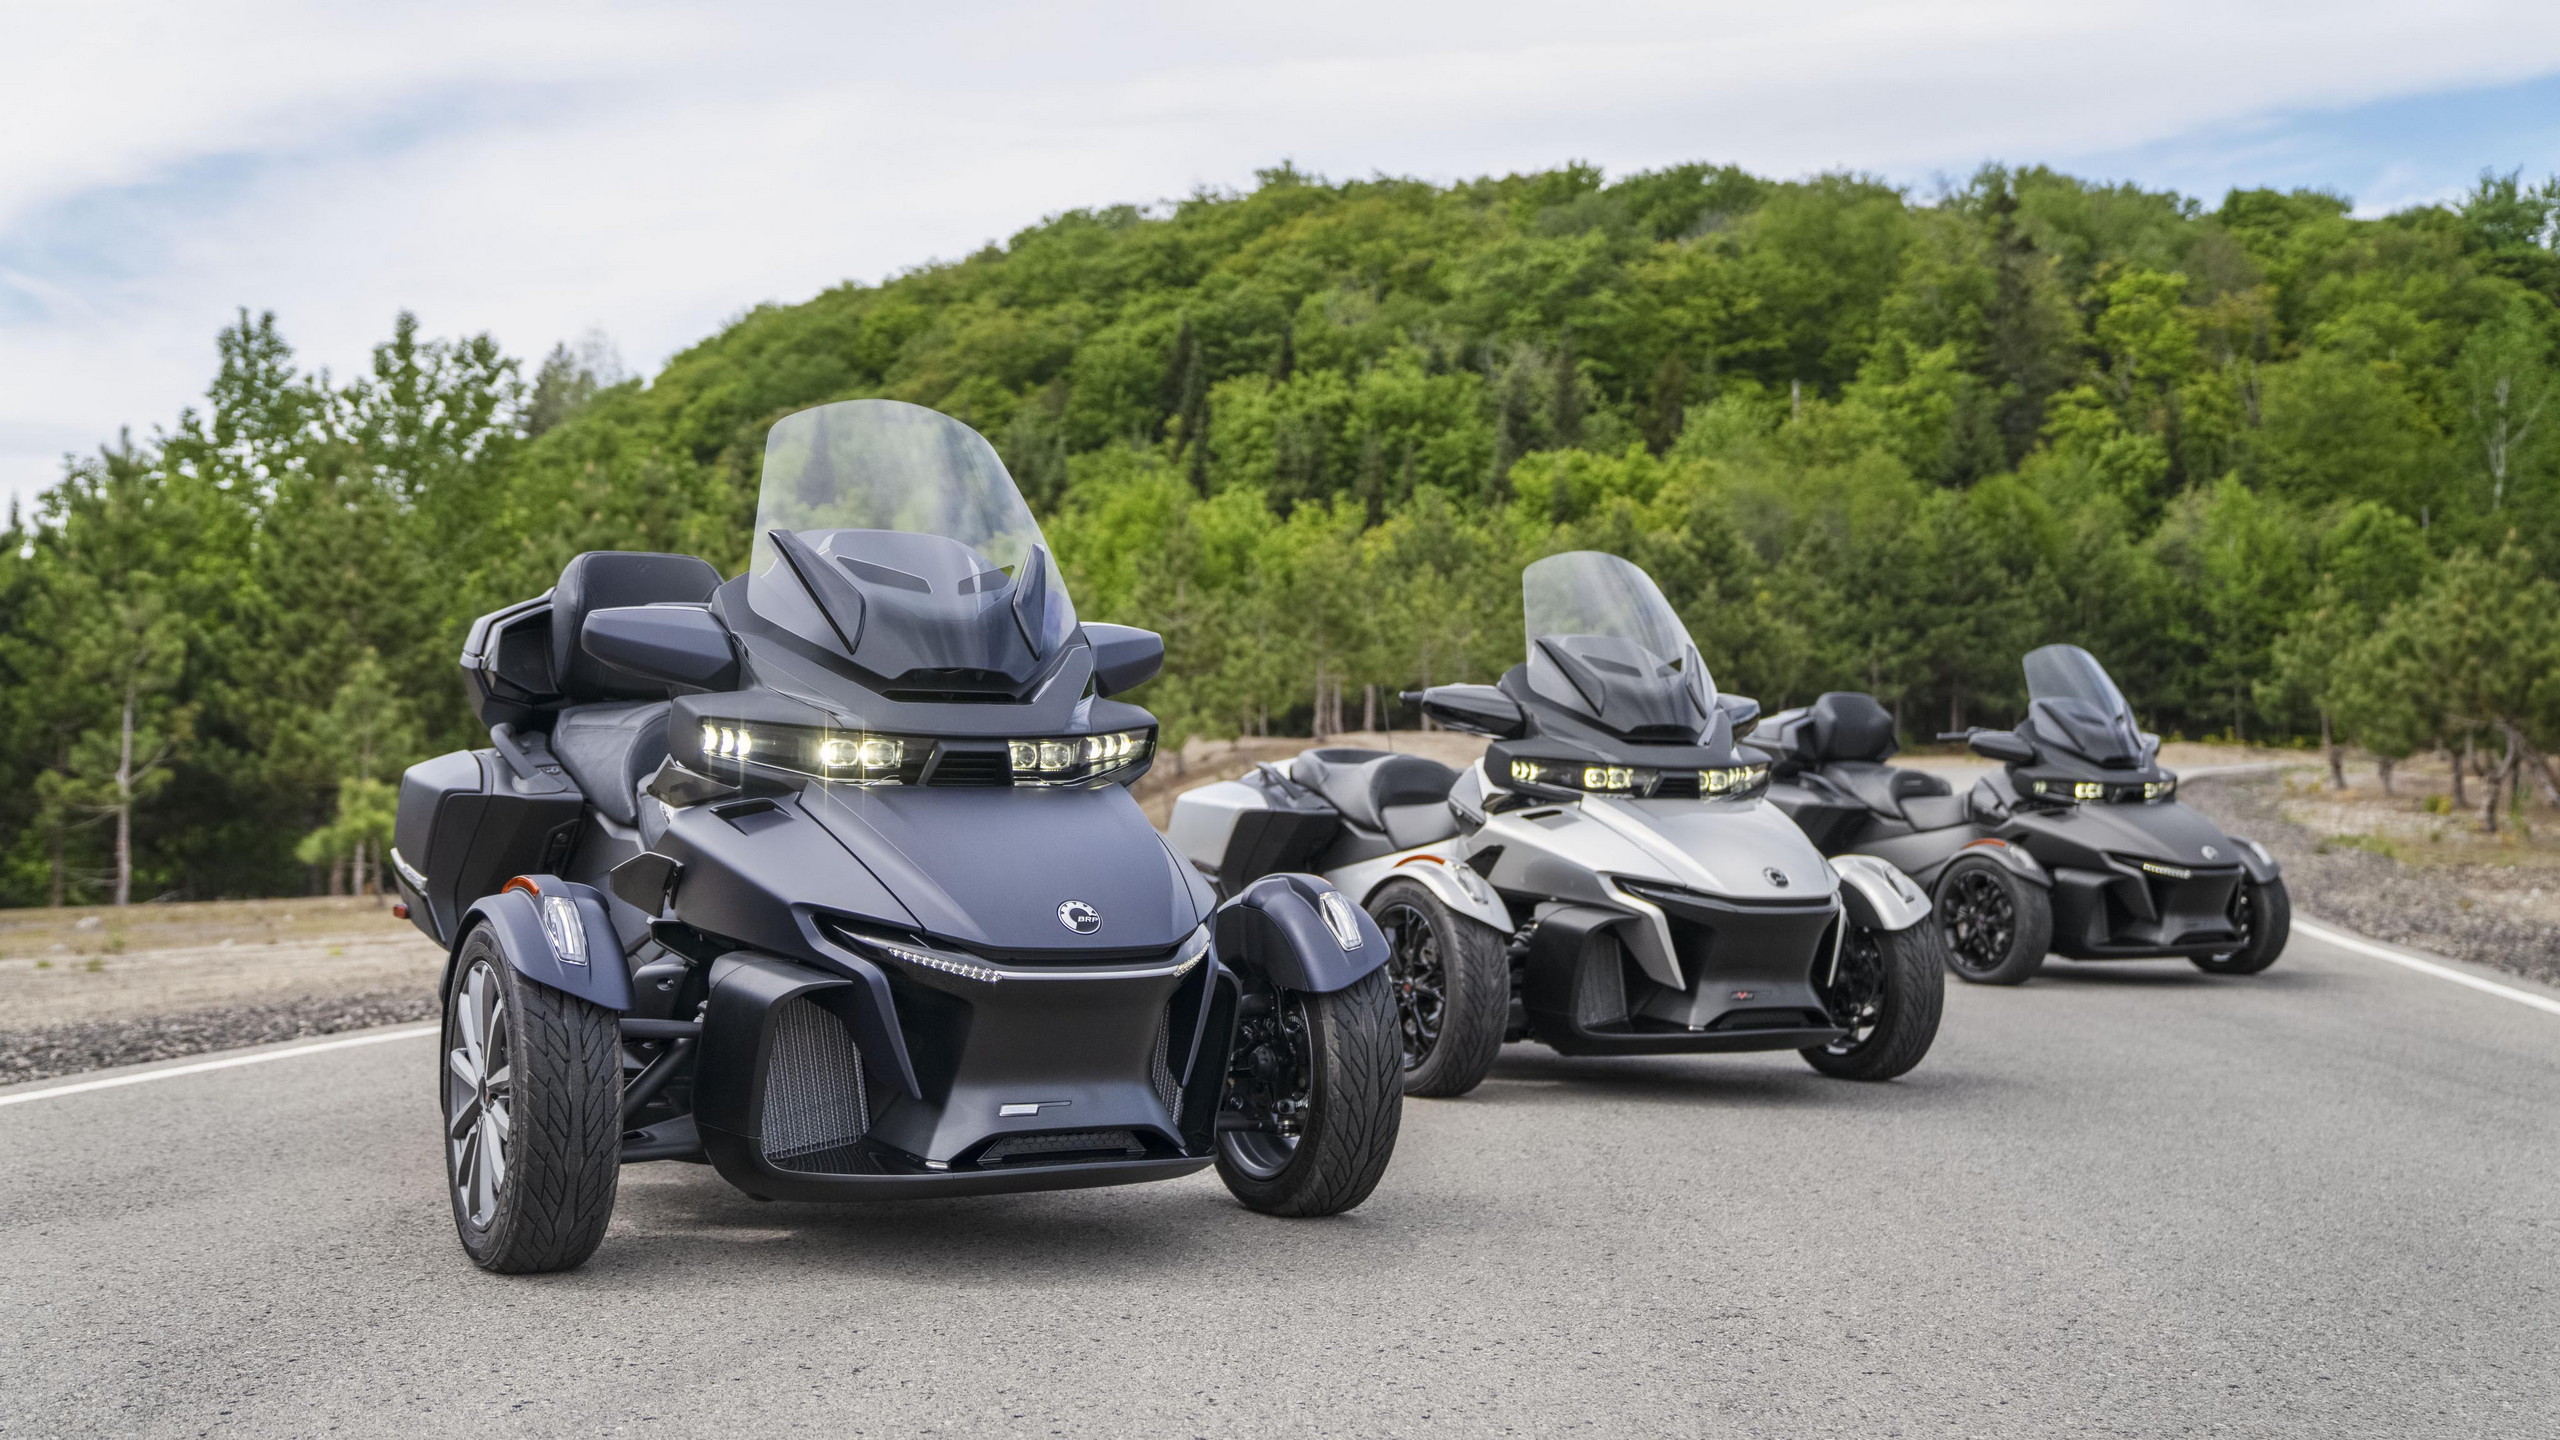 2022 CanAm Spyder RT Is All About Luxury Cruising, Promises Wild 3